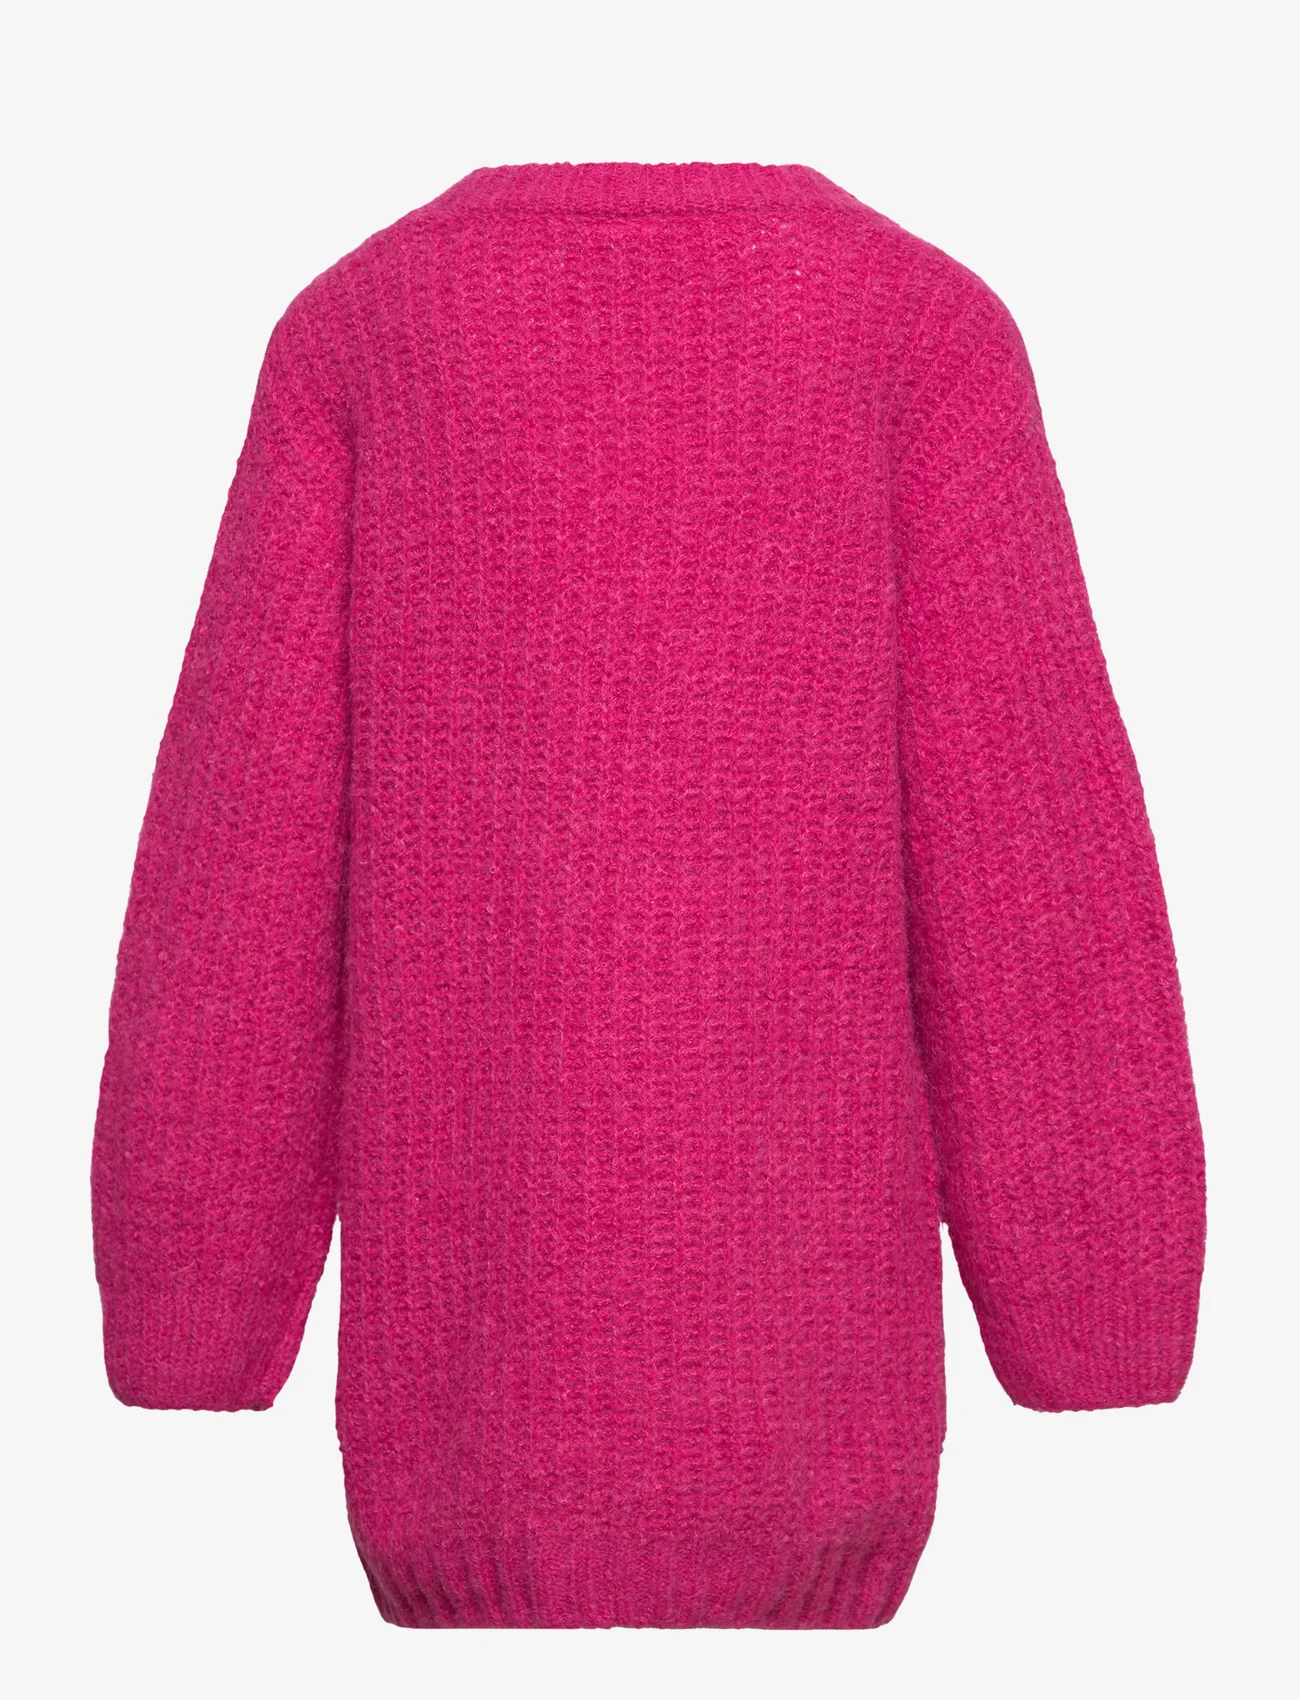 name it - NKFOMINKE LS LONG KNIT CARD - kardigany - pink cosmos - 1